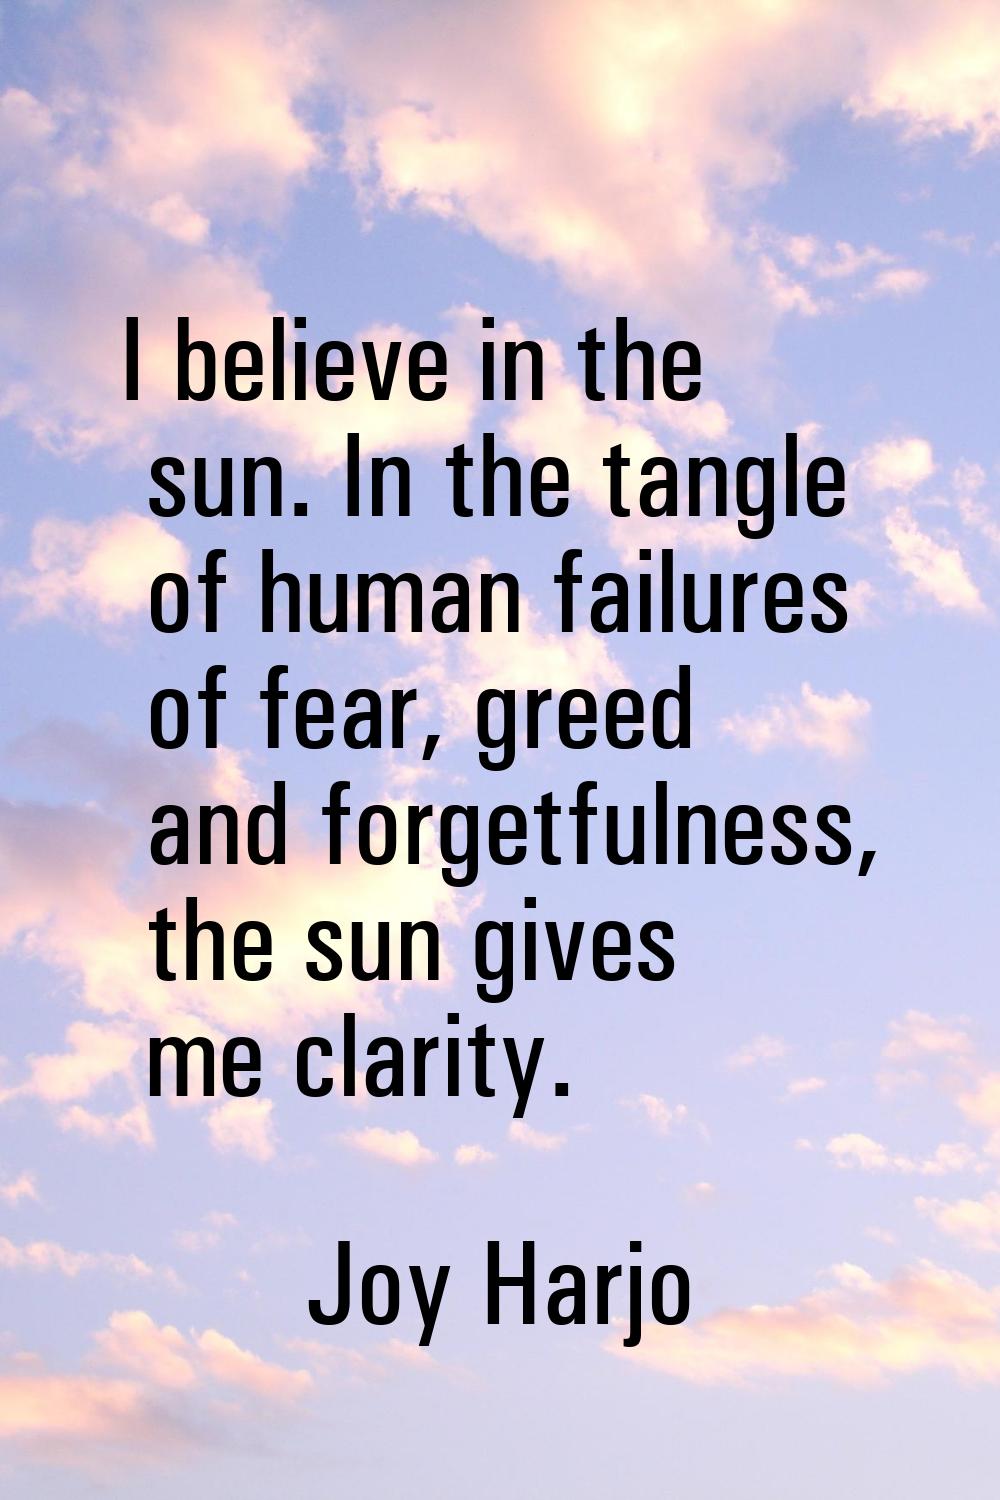 I believe in the sun. In the tangle of human failures of fear, greed and forgetfulness, the sun giv